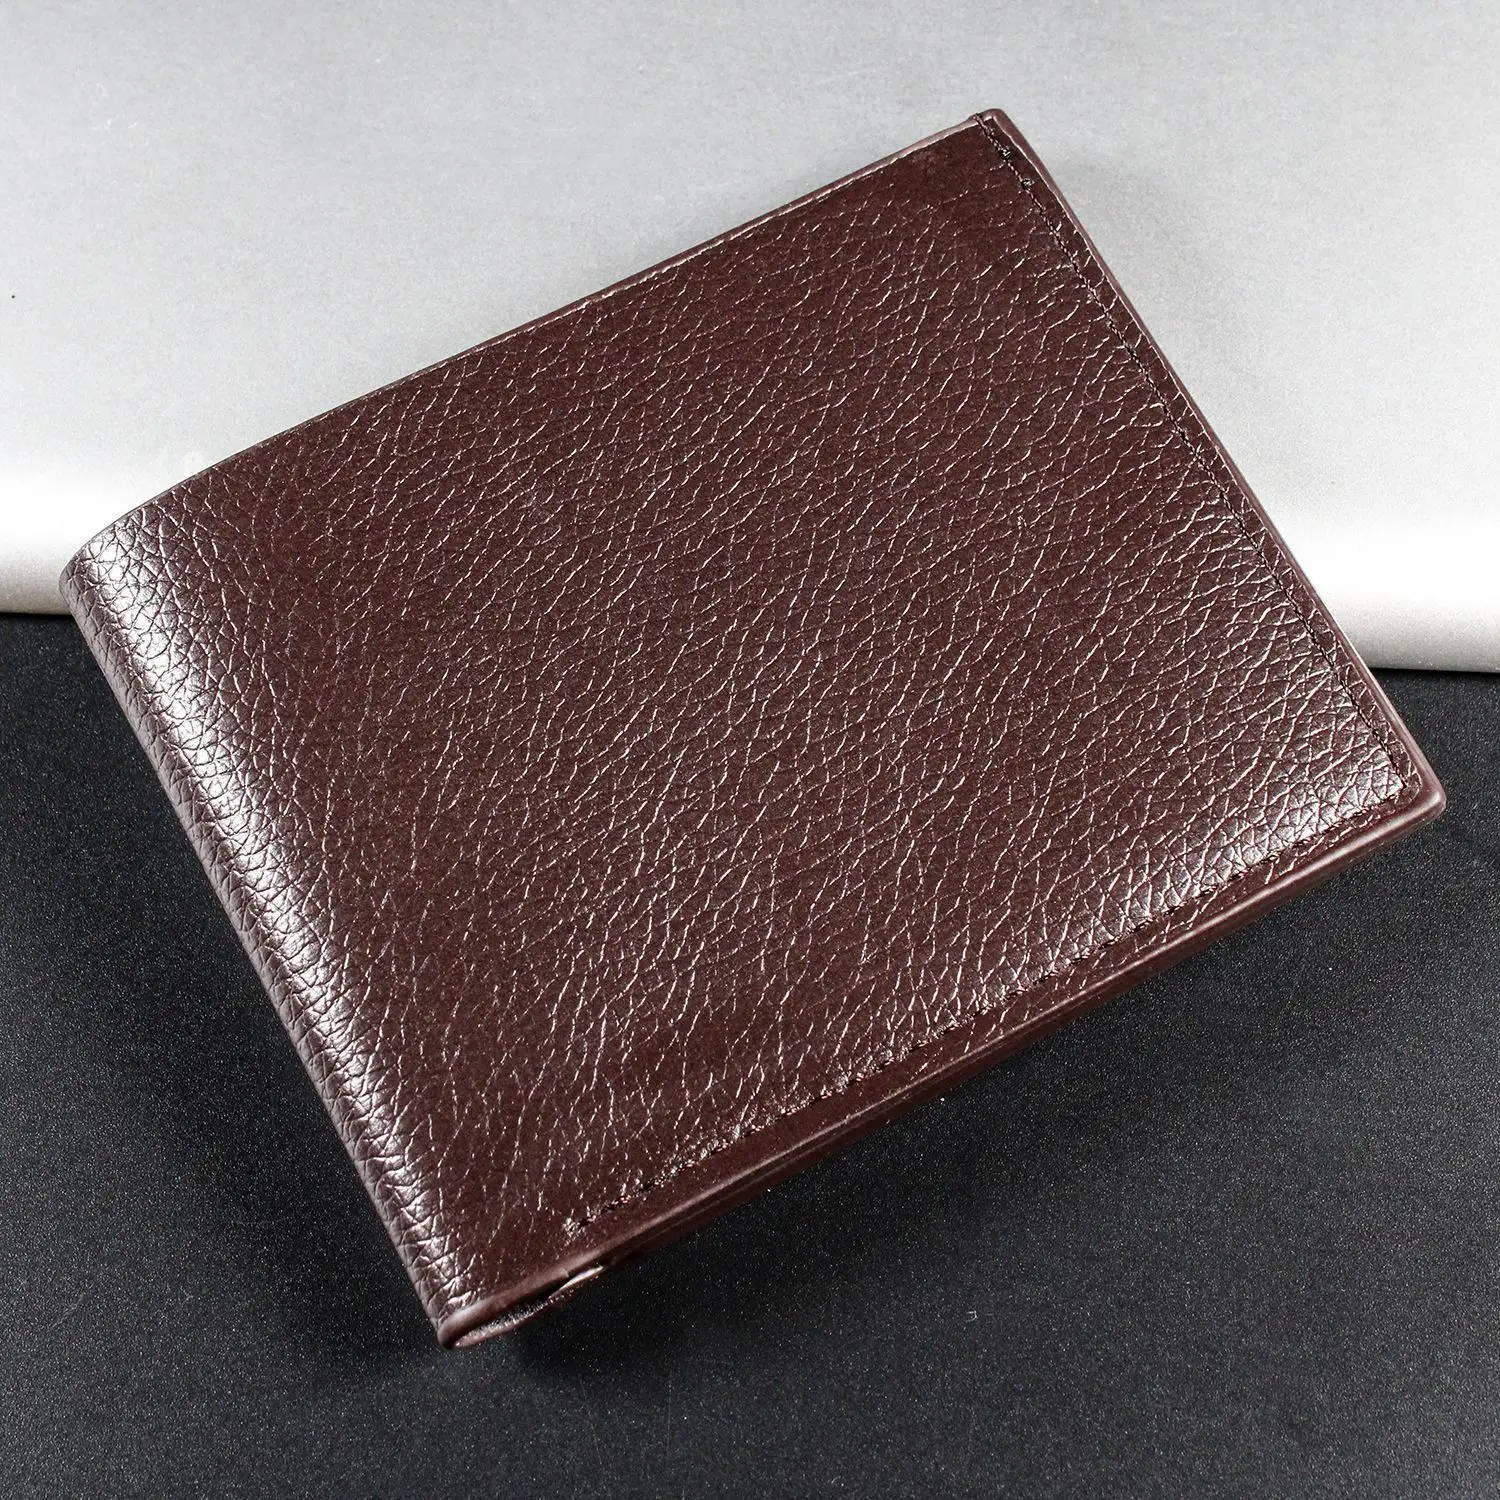 Hot Sales High Quality Soft Leather Classic Designer Man Wallet High Quality Leather Purse Men Wallets Slim